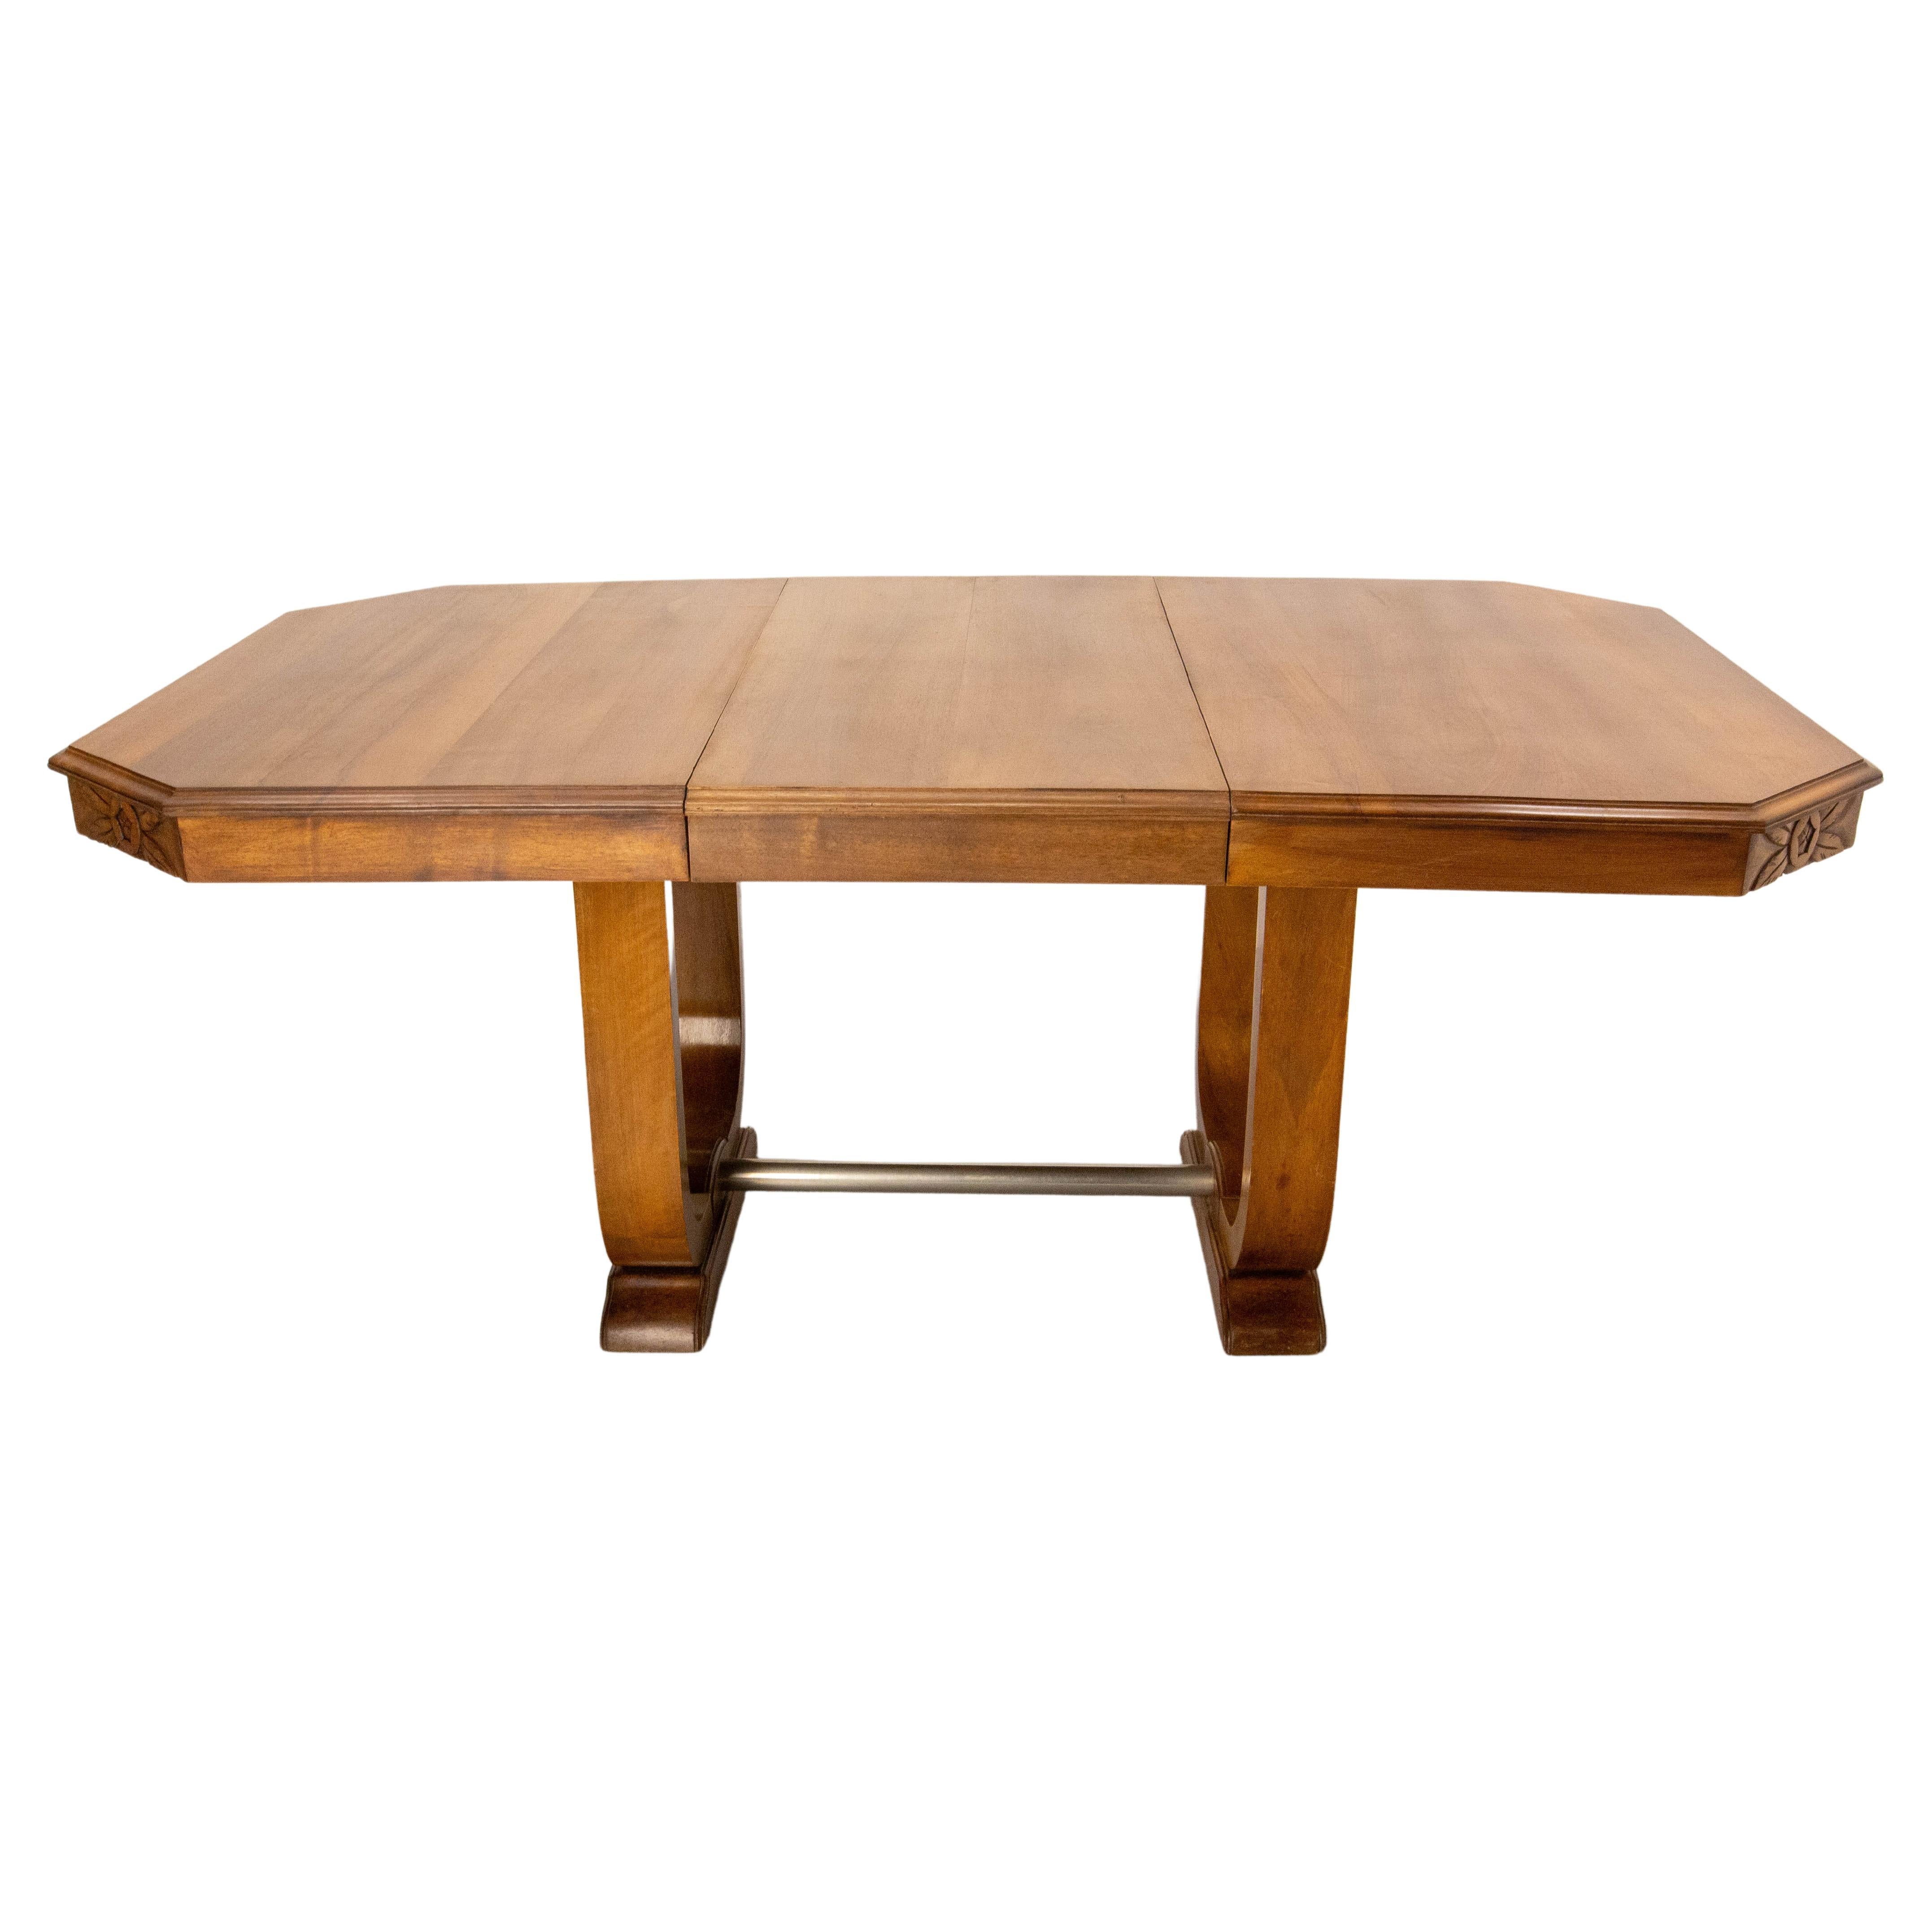 Dining Walnut Table with Central Extension  Art Déco Period, circa 1930 France